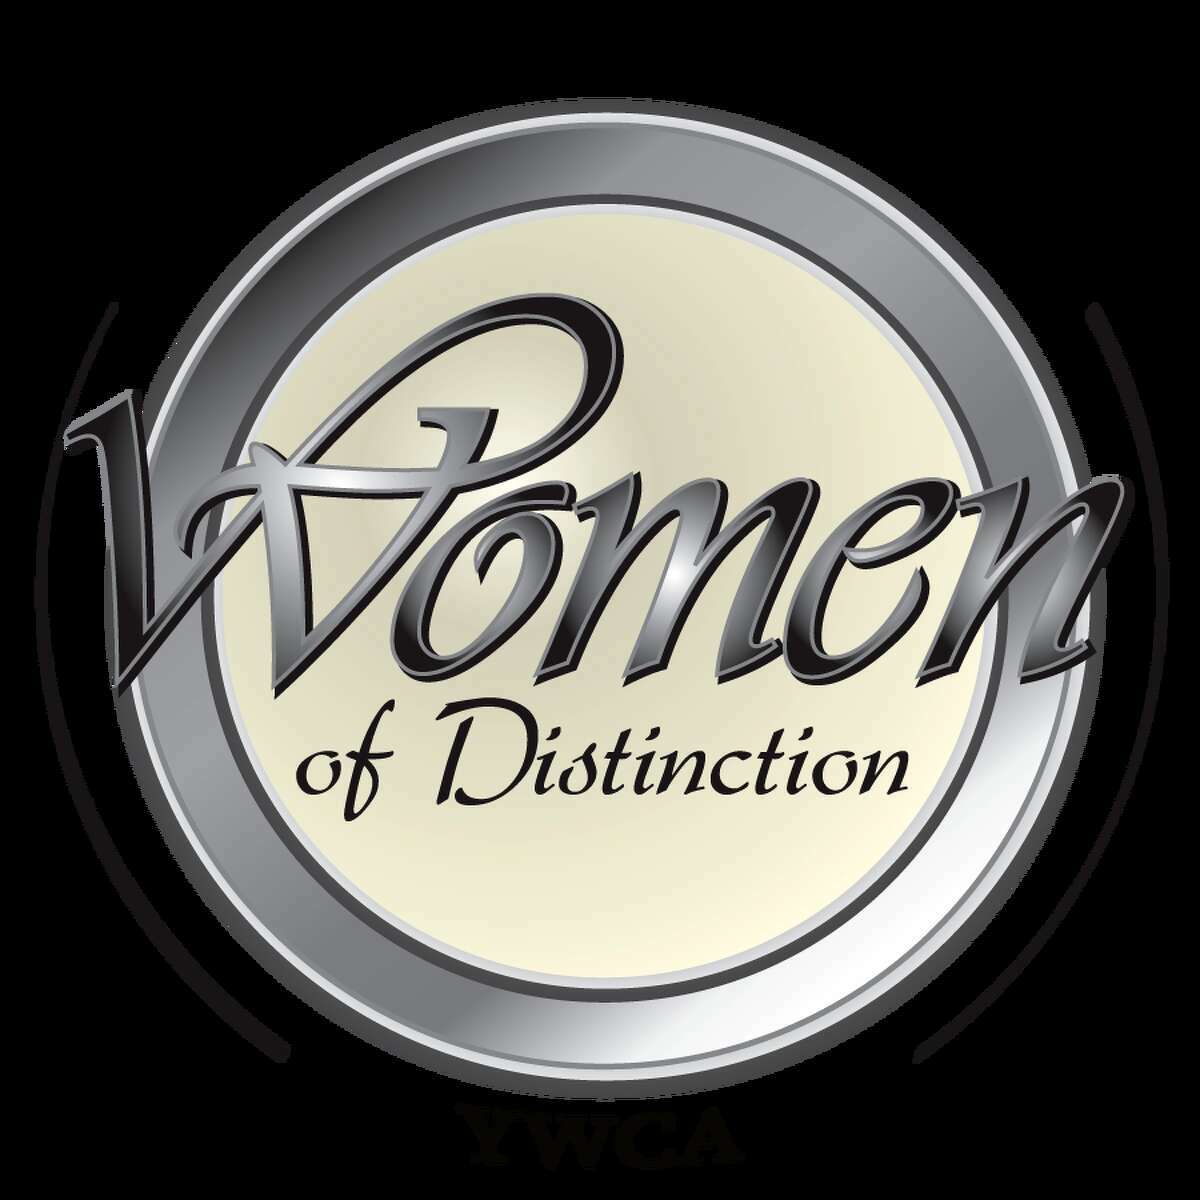 Nominees are now being sought through Feb. 24 for the YWCA Southwestern Illinois Women of Distinction.